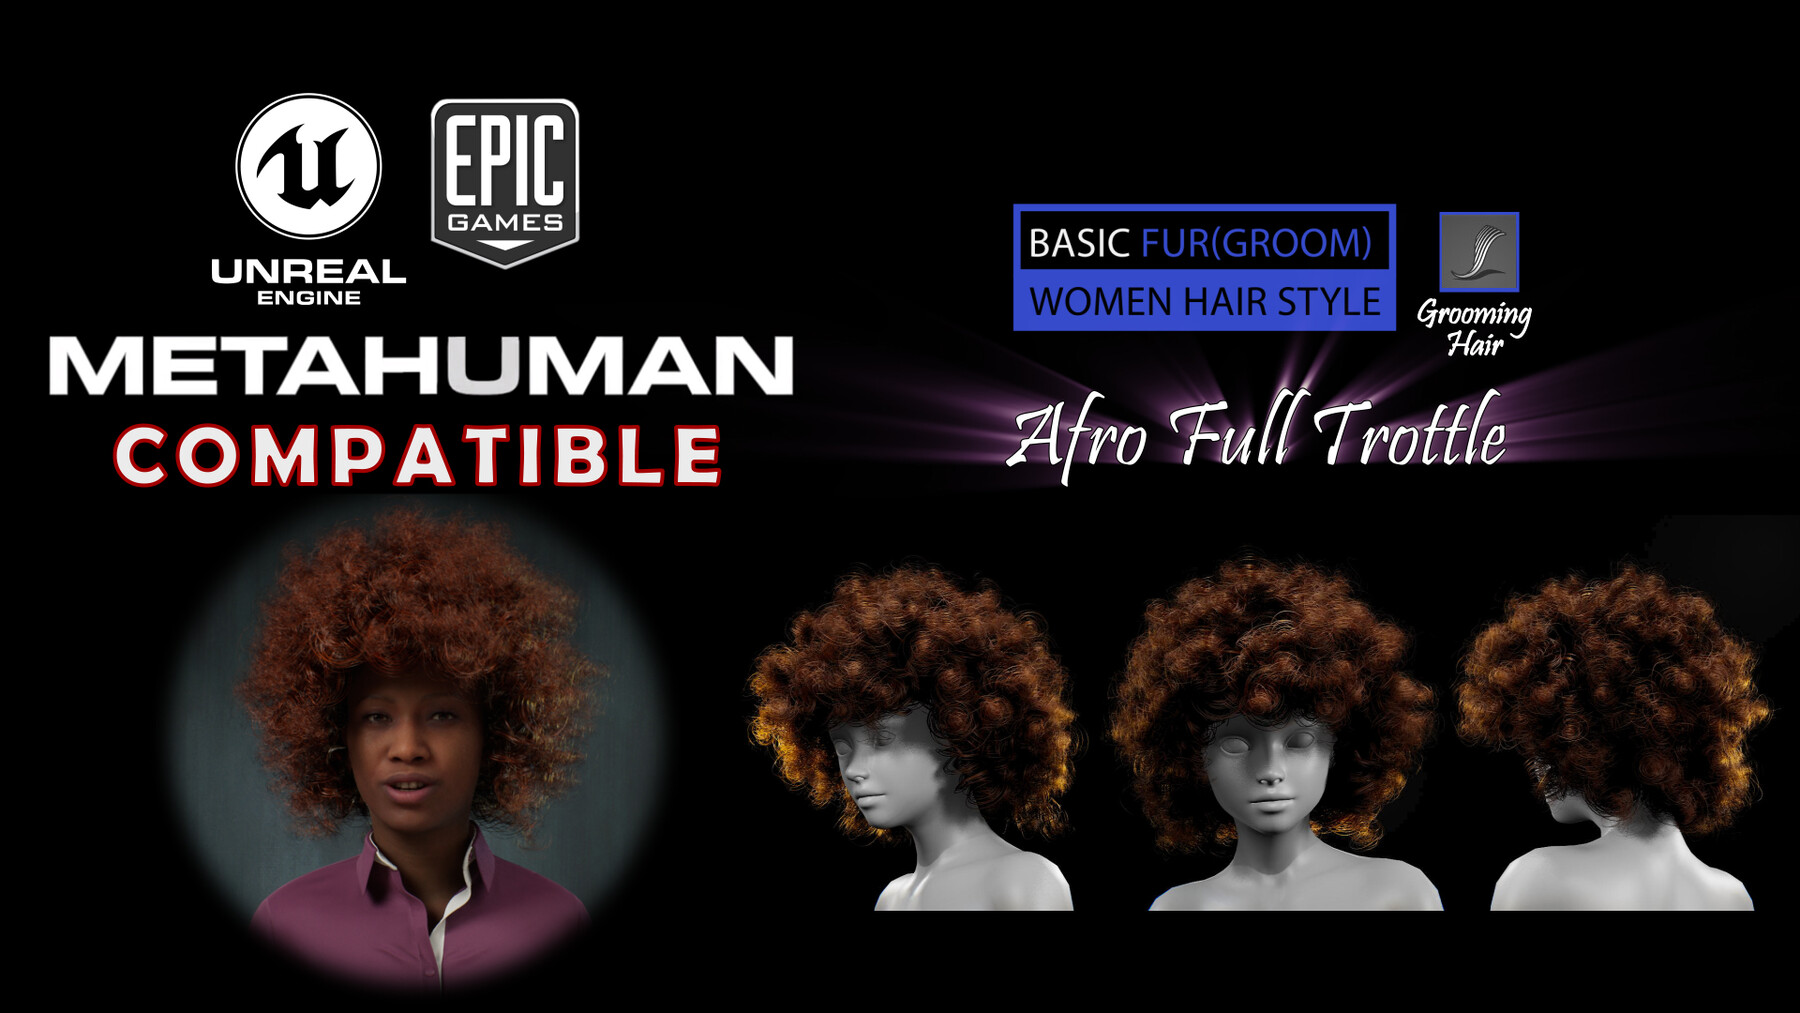 Afro Full Throttle Grooming Real-Time Hairstyle